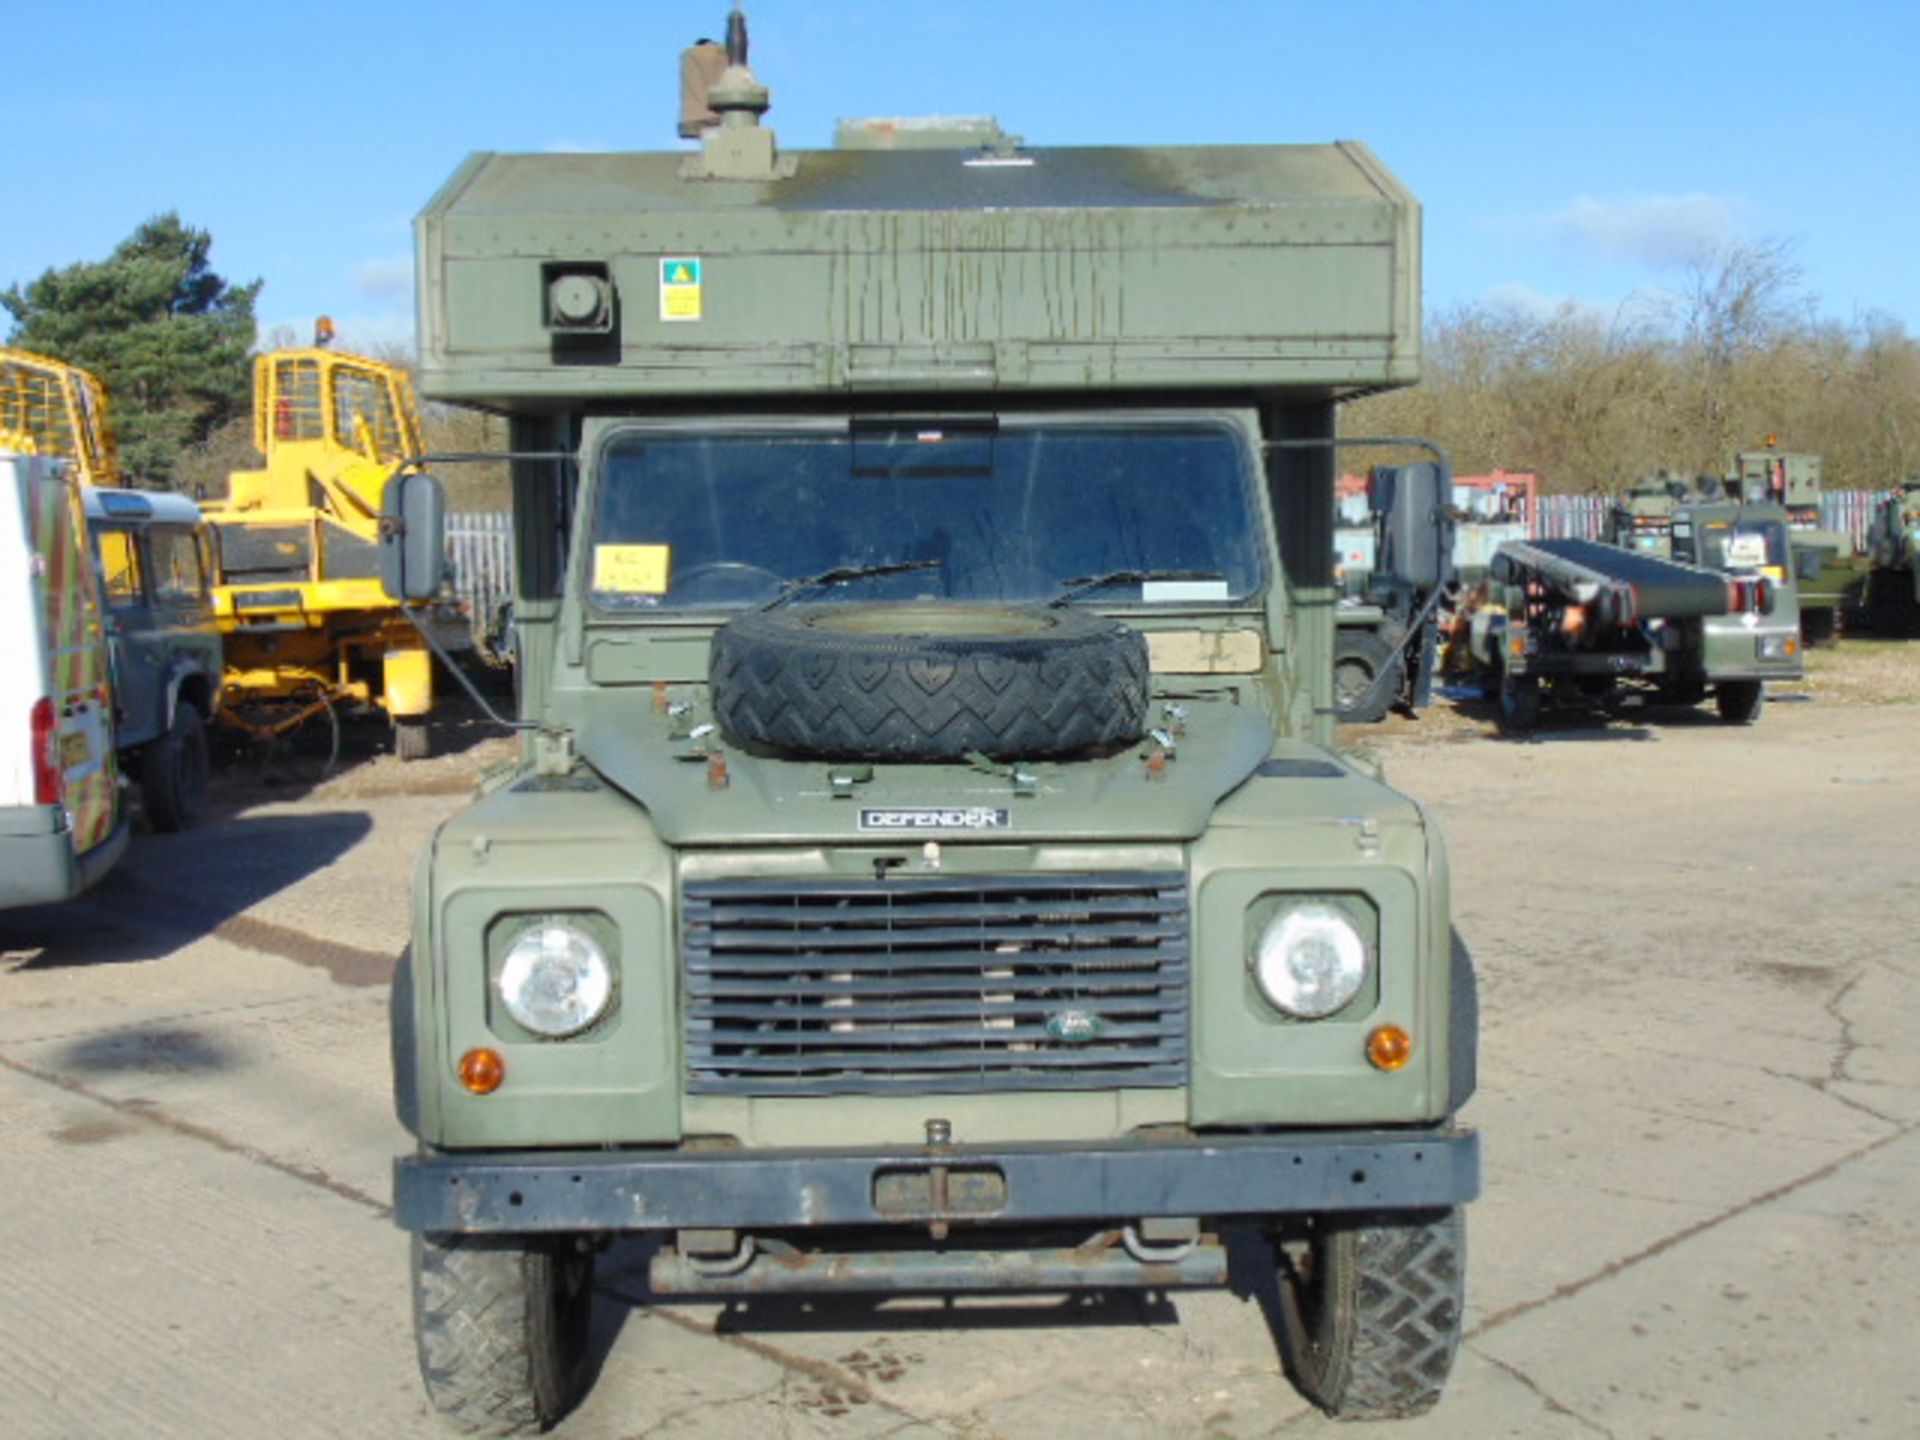 Military Specification Land Rover Wolf 130 ambulance - Image 2 of 15